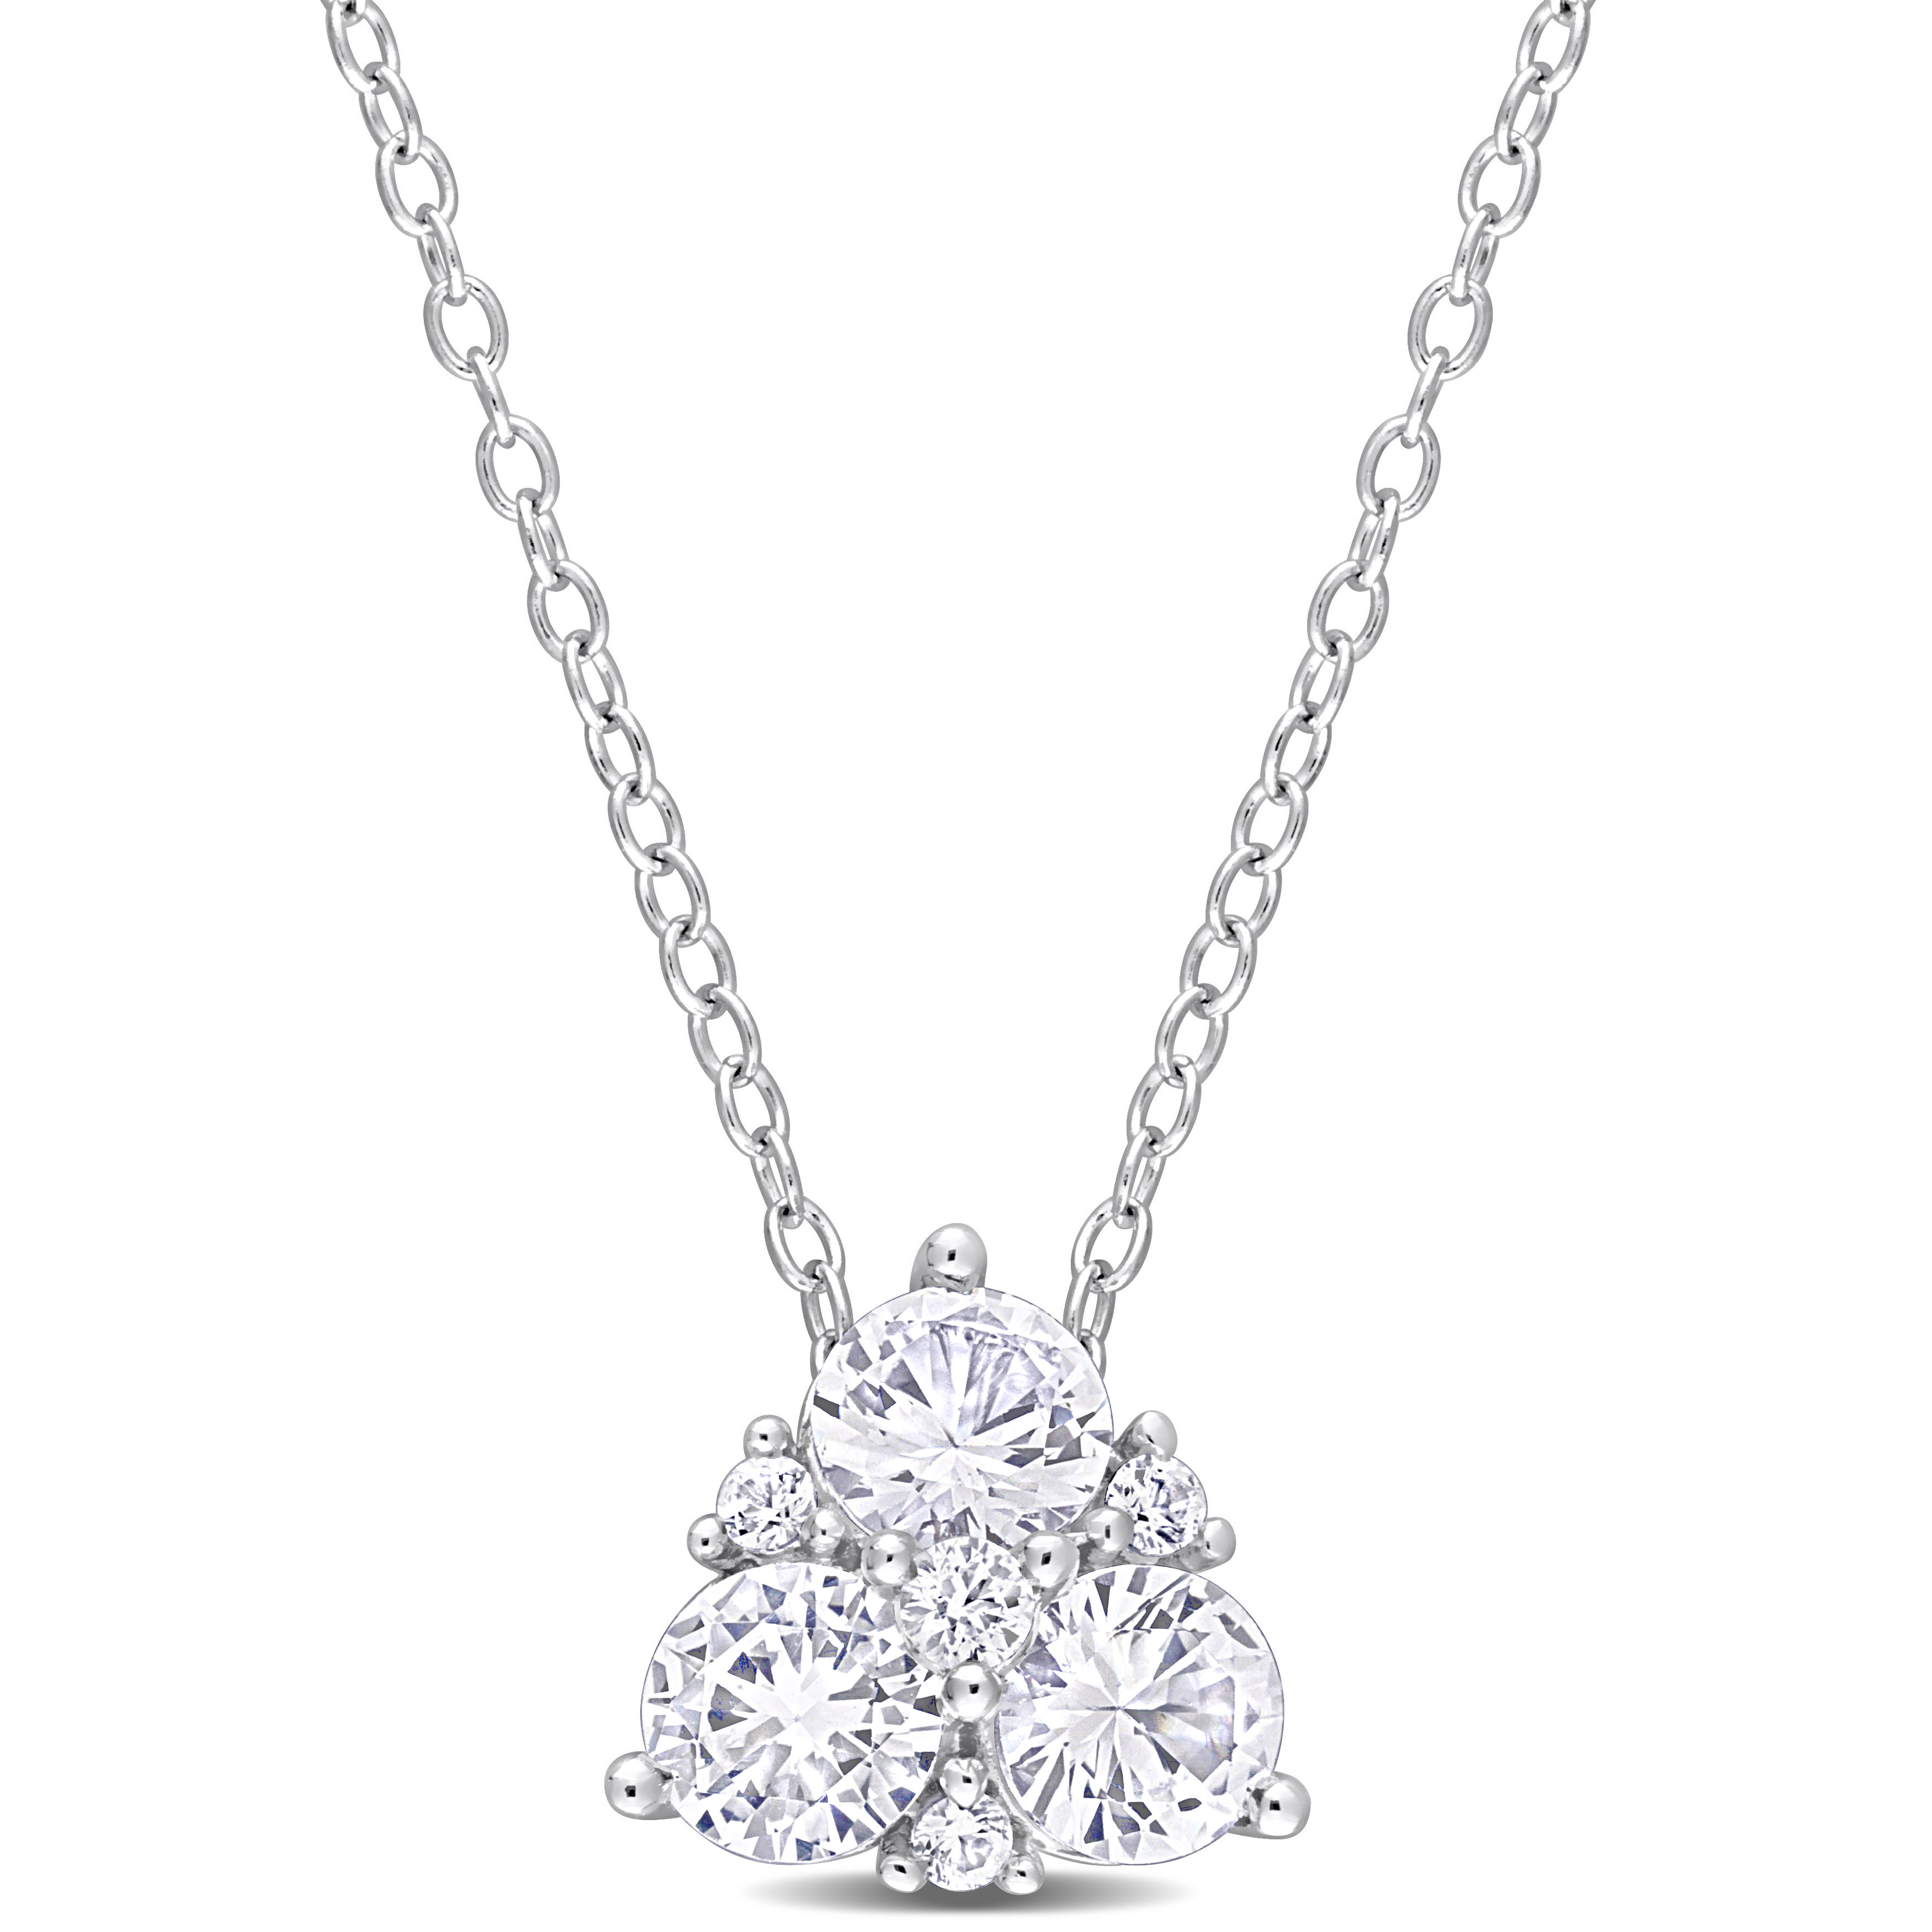 1 1/2 CT TGW Created White Sapphire Drop Pendant with Chain in Sterling Silver - 18 in.